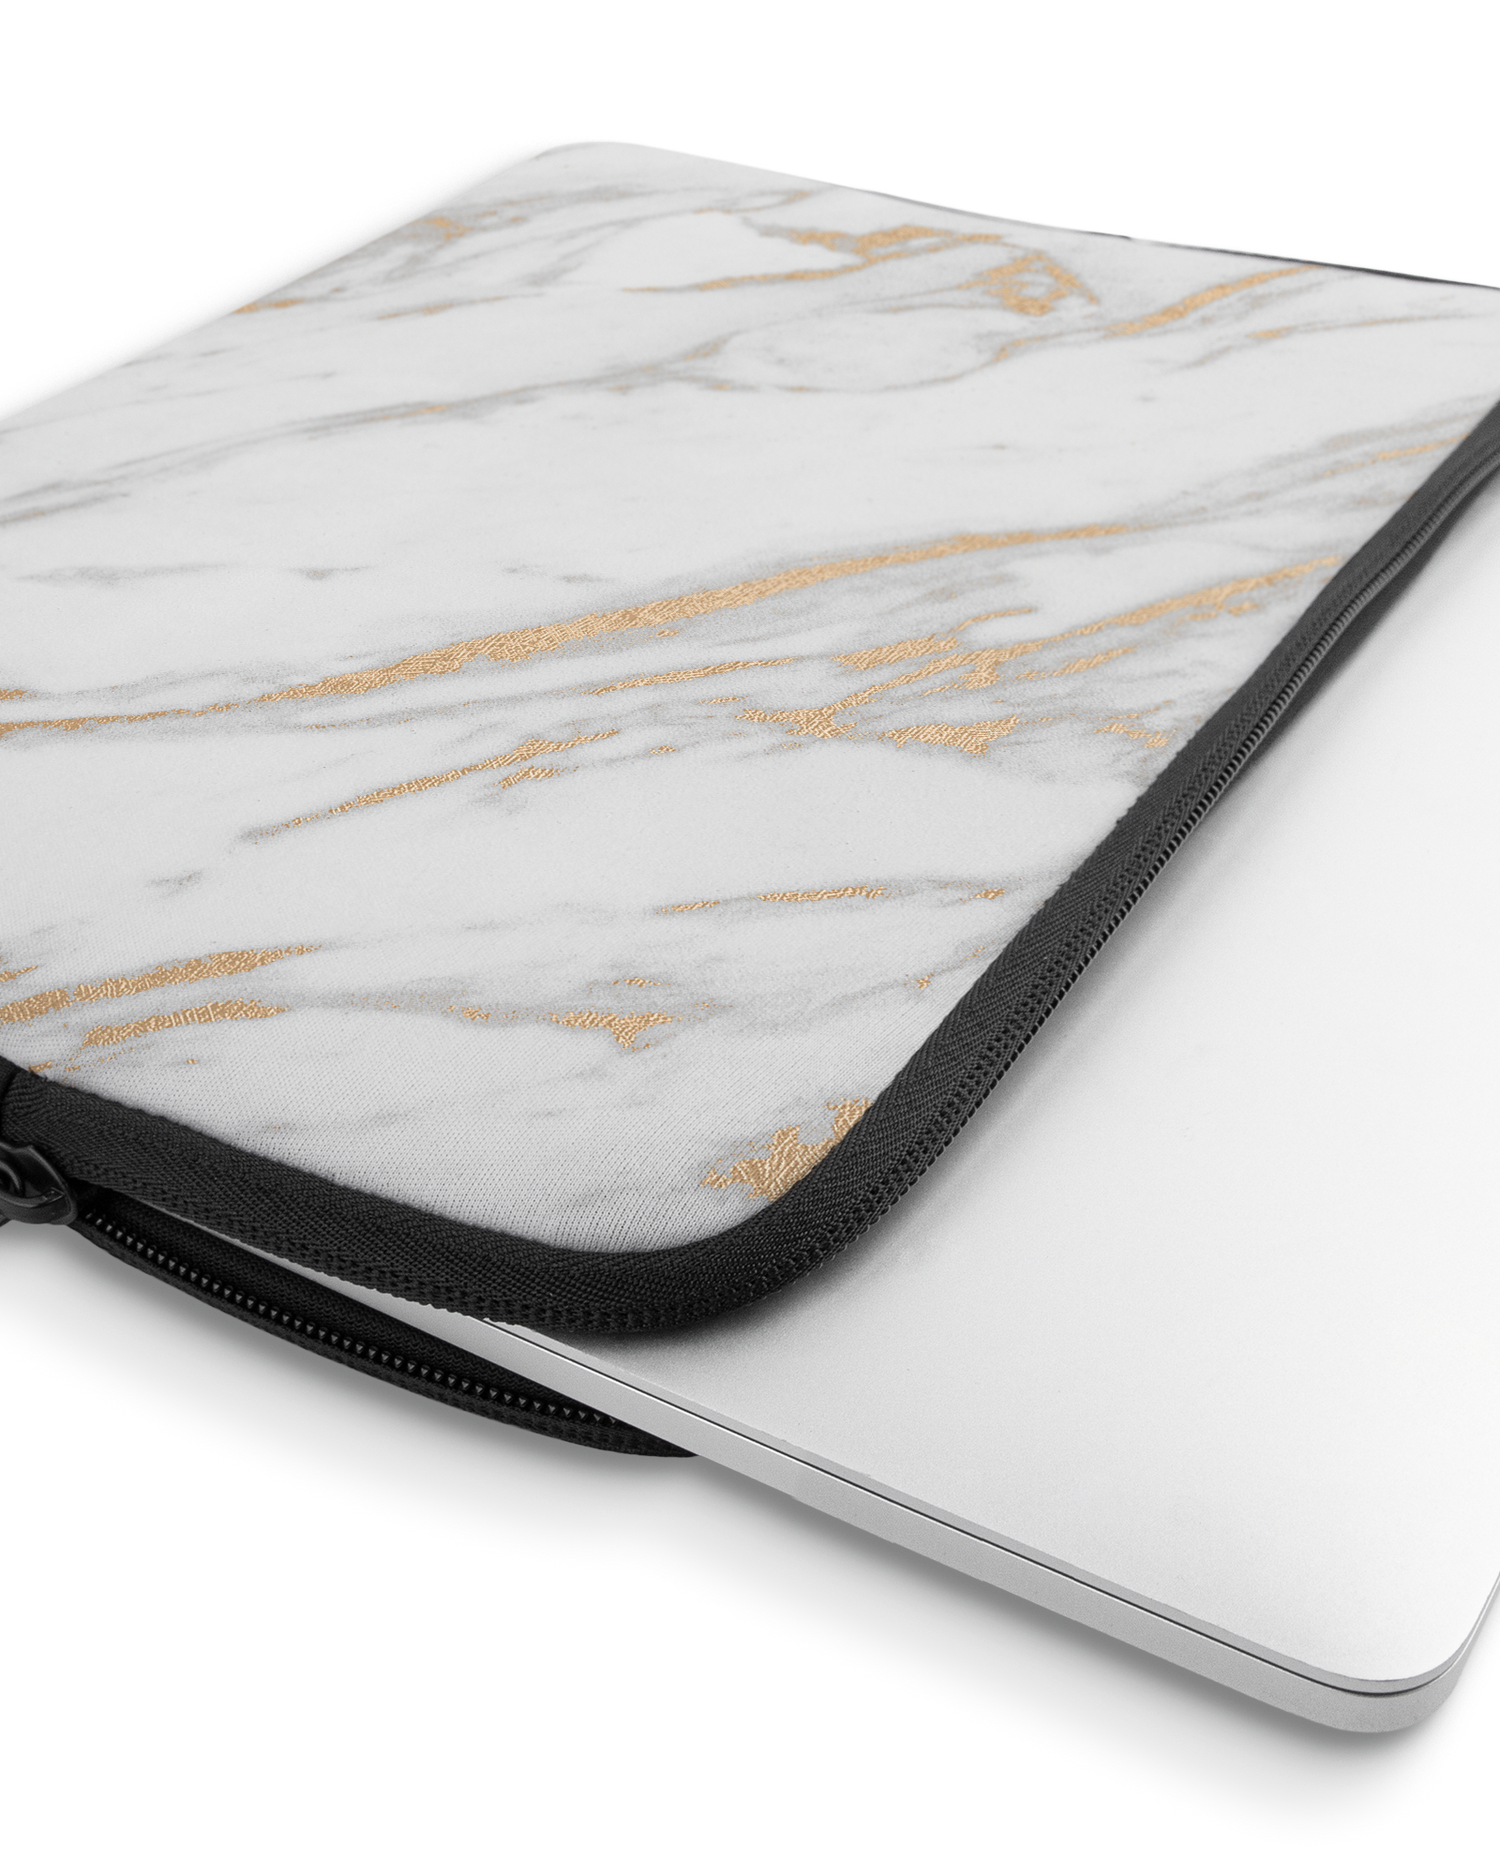 Gold Marble Elegance Laptop Case 13 inch with device inside